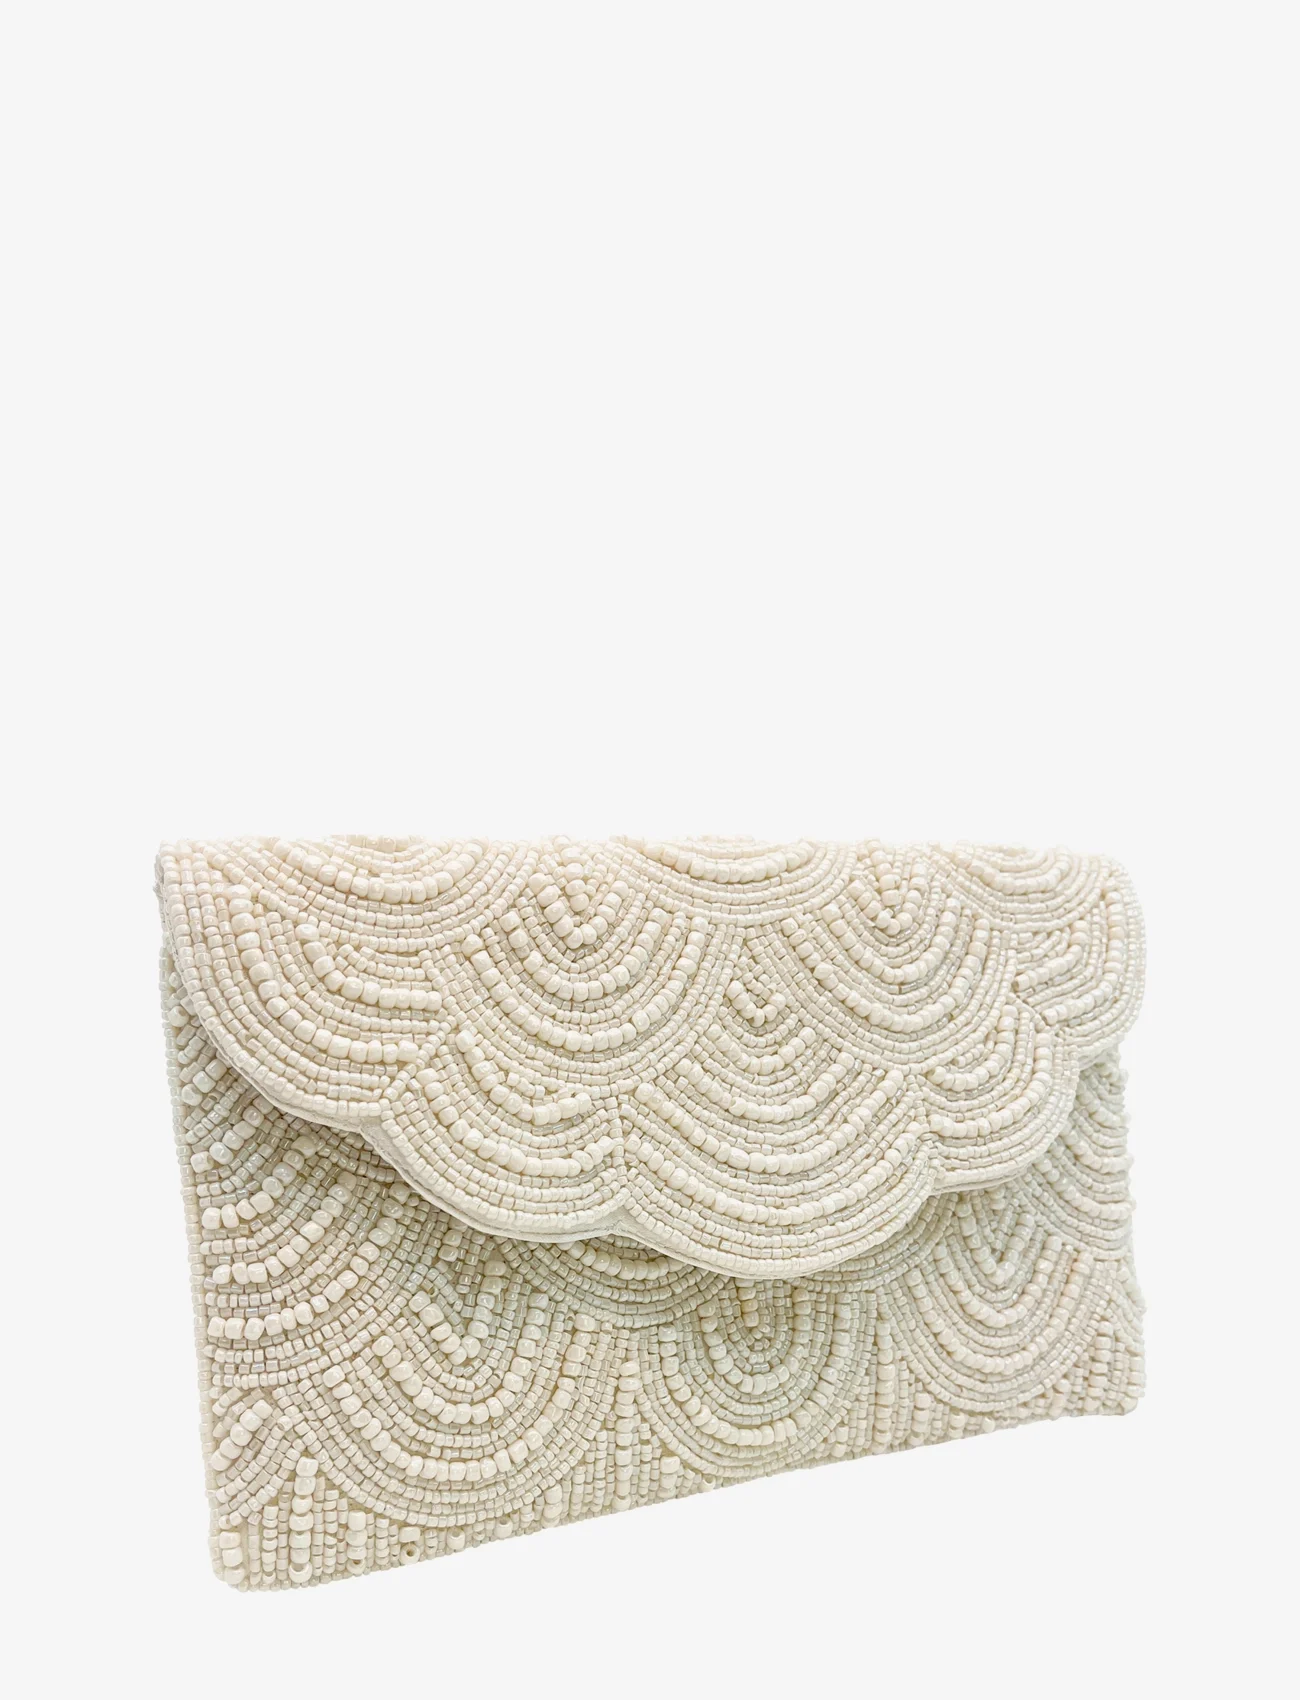 Pipol's Bazaar - Casablanca Clutch Near White - party wear at outlet prices - white - 1